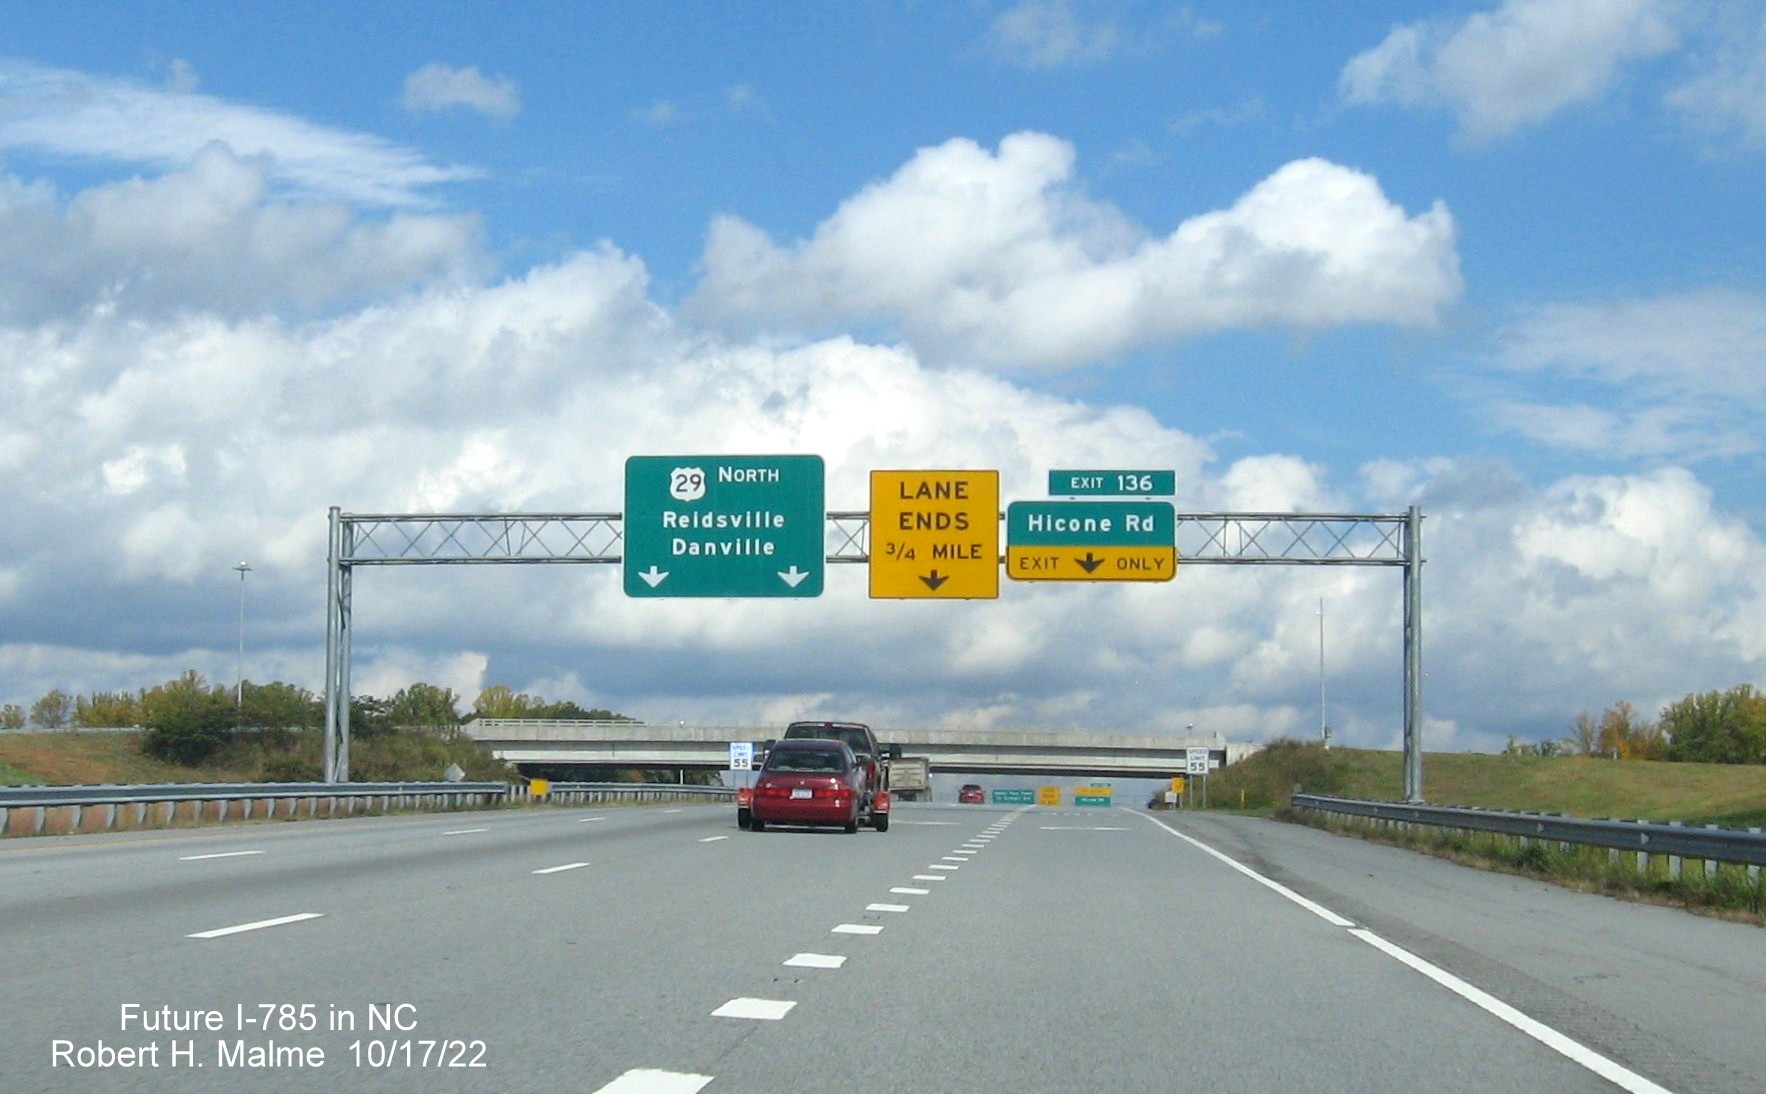 Image of 1/4 mile advance overhead sign for Hicone Road section on US 29 North, October 2022